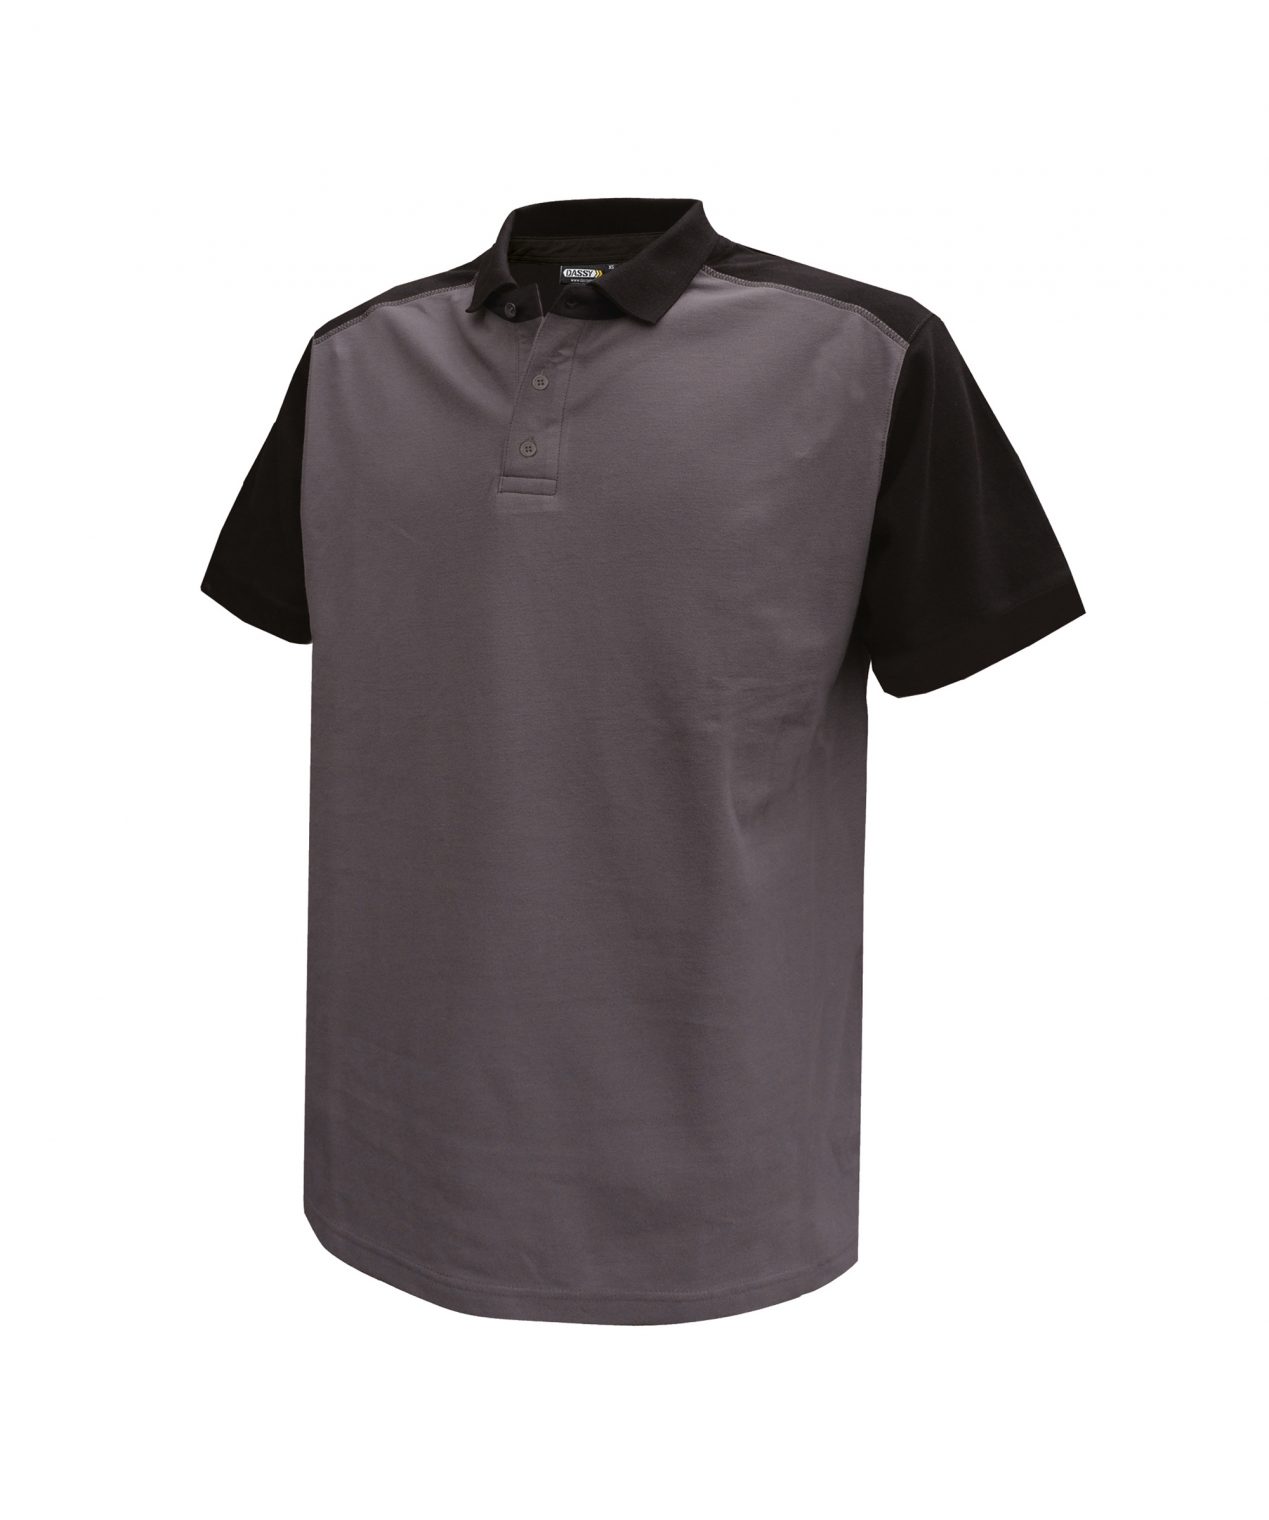 cesar two tone polo shirt cement grey black front